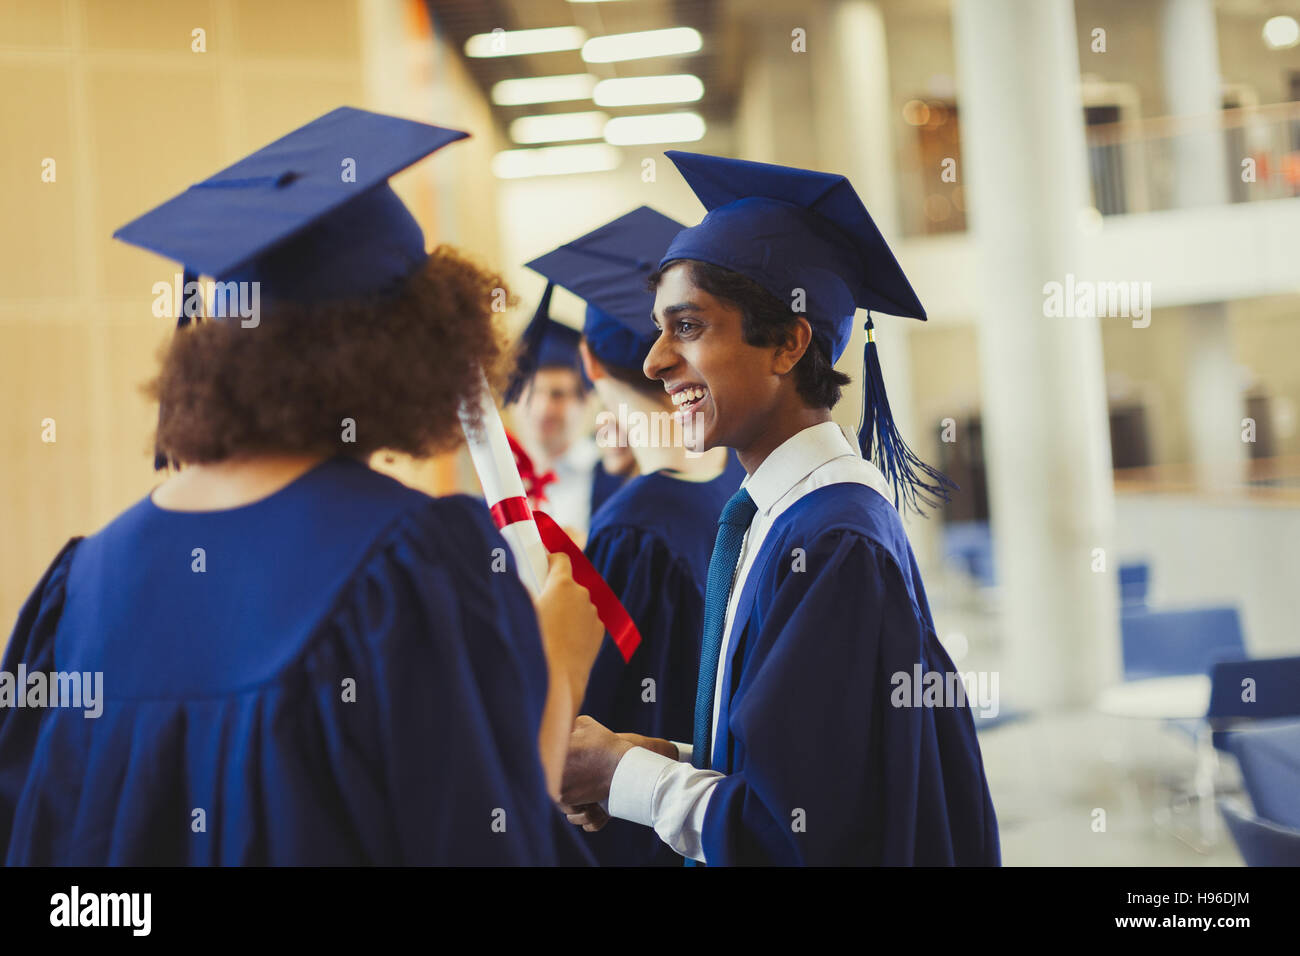 Smiling college graduates in cap and gown Stock Photo